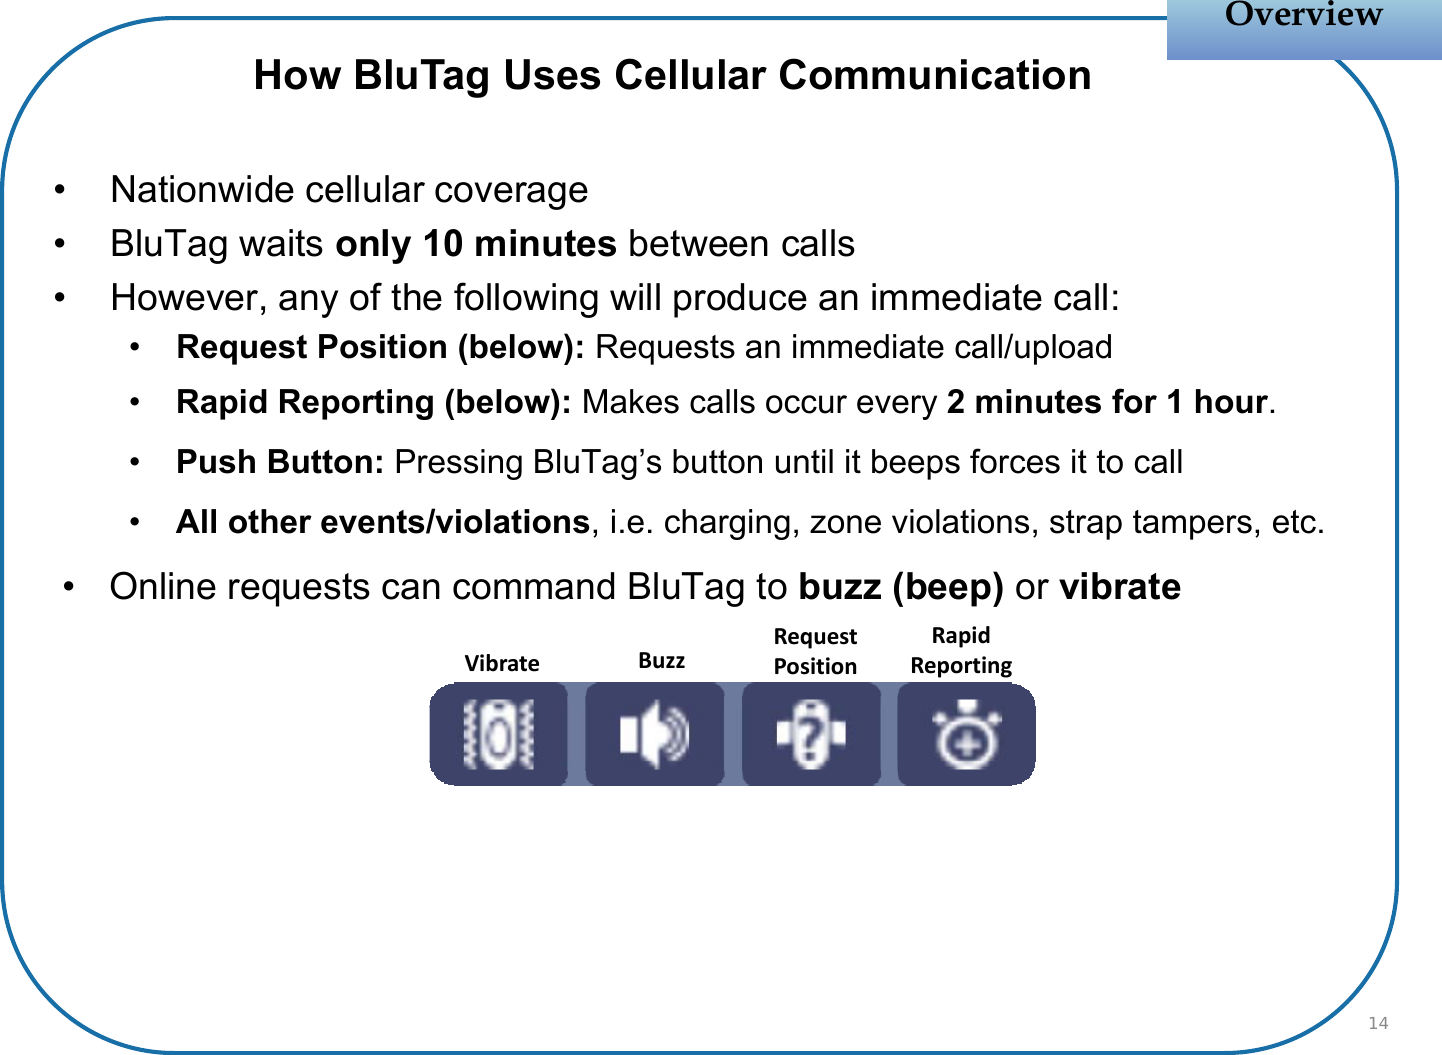 • Nationwide cellular coverage• BluTag waits only 10 minutes between calls• However, any of the following will produce an immediate call:•Request Position (below): Requests an immediate call/upload•Rapid Reporting (below): Makes calls occur every 2 minutes for 1 hour.•Push Button: Pressing BluTag’s button until it beeps forces it to call•All other events/violations, i.e. charging, zone violations, strap tampers, etc.• Online requests can command BluTag to buzz (beep) or vibrateOverviewOverviewHow BluTag Uses Cellular CommunicationBuzzVibrateRapidReportingRequestPosition14